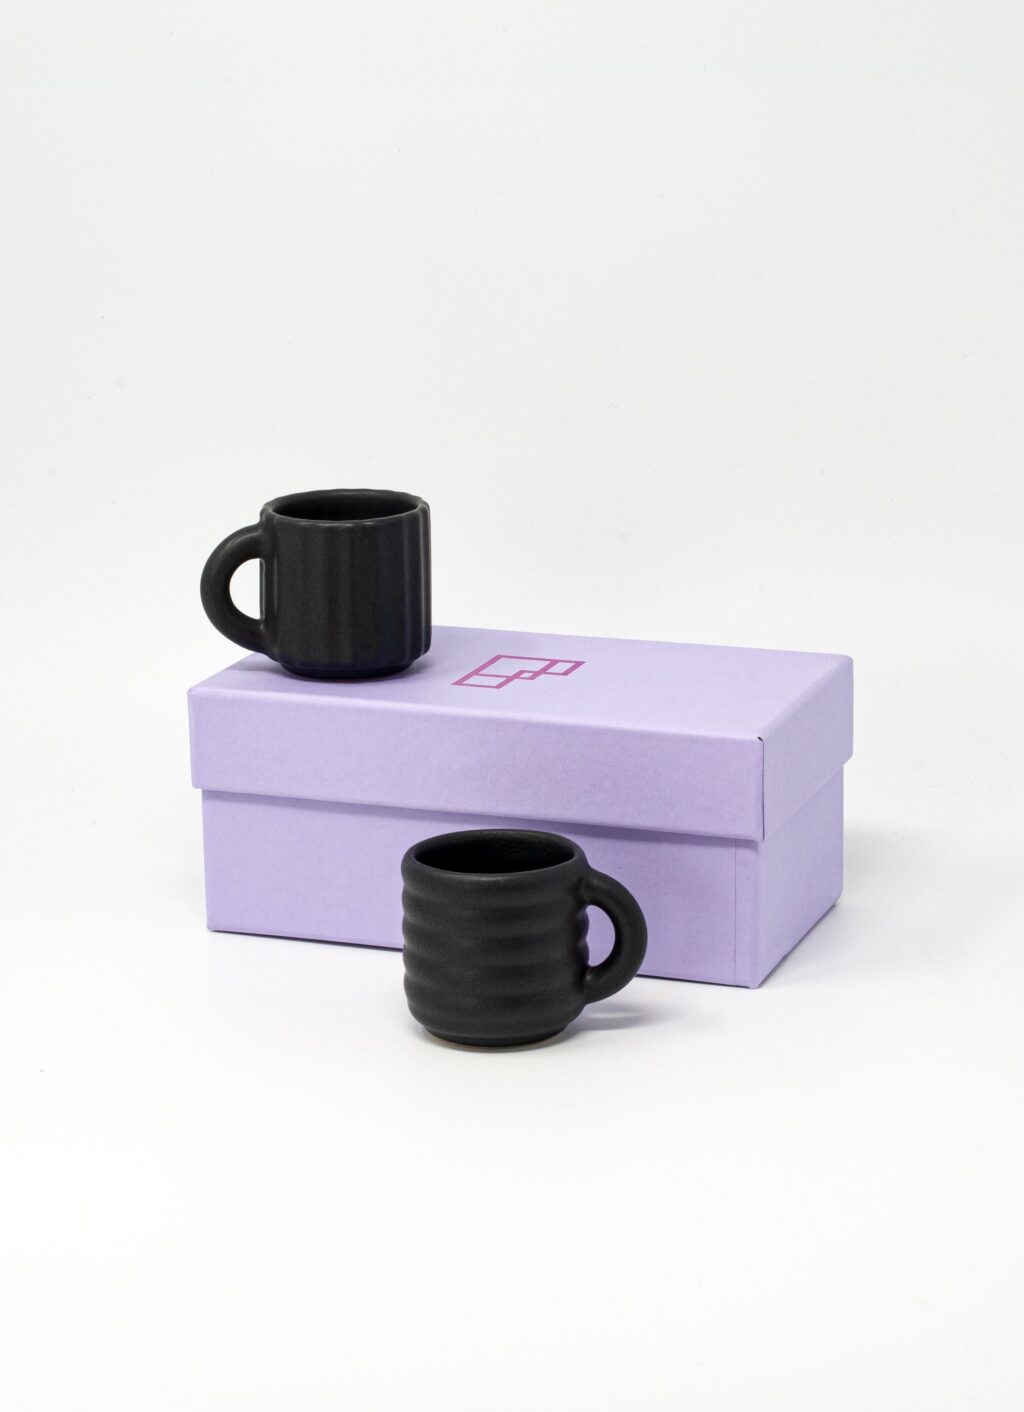 Form and Seek - Ripple Espresso Cups - Set of Two - Black